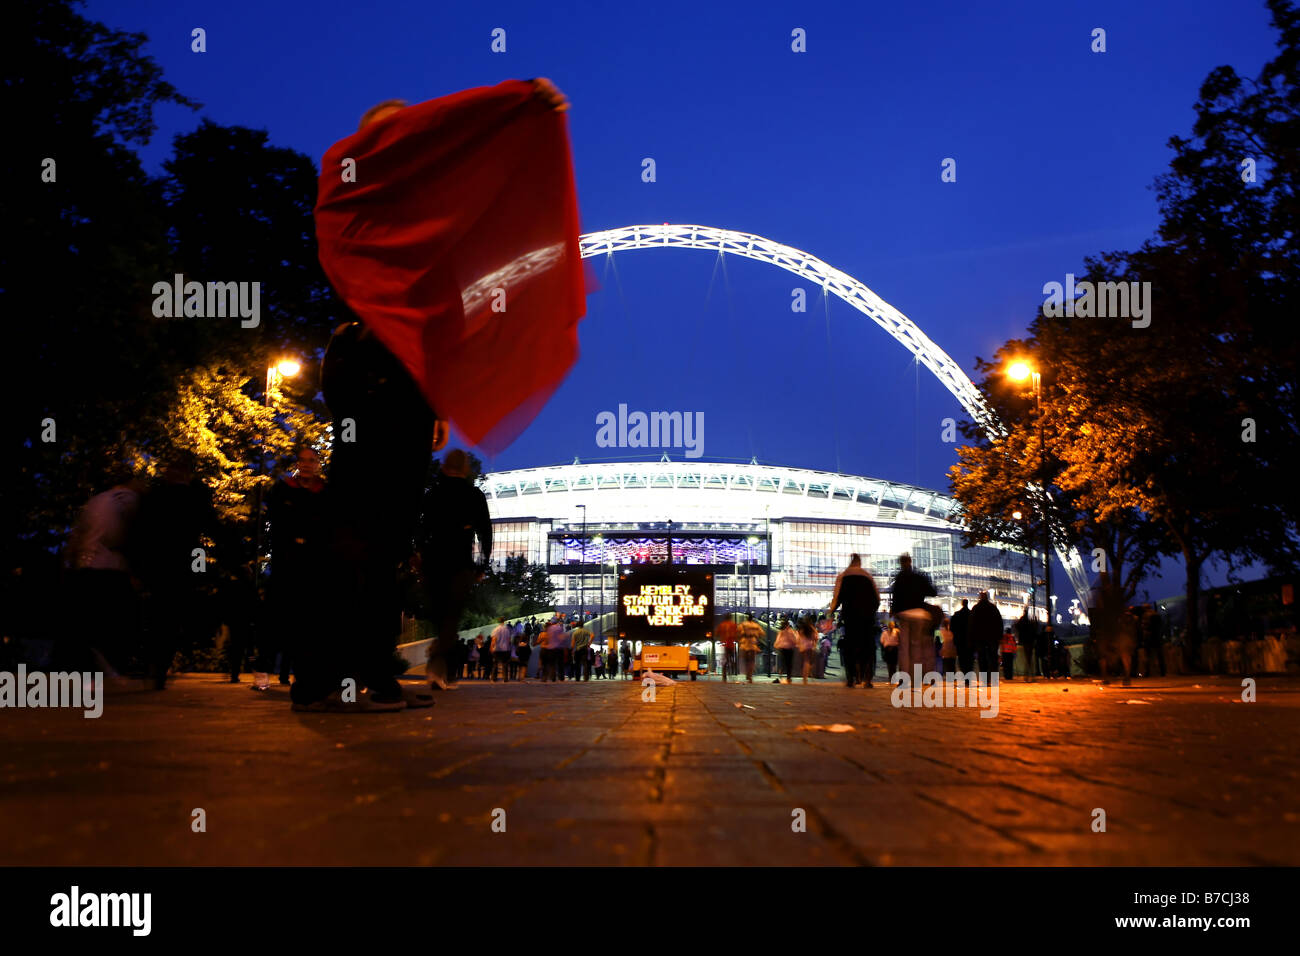 Football supporters arrive at Wembley Stadium before an FA Cup match Stock Photo